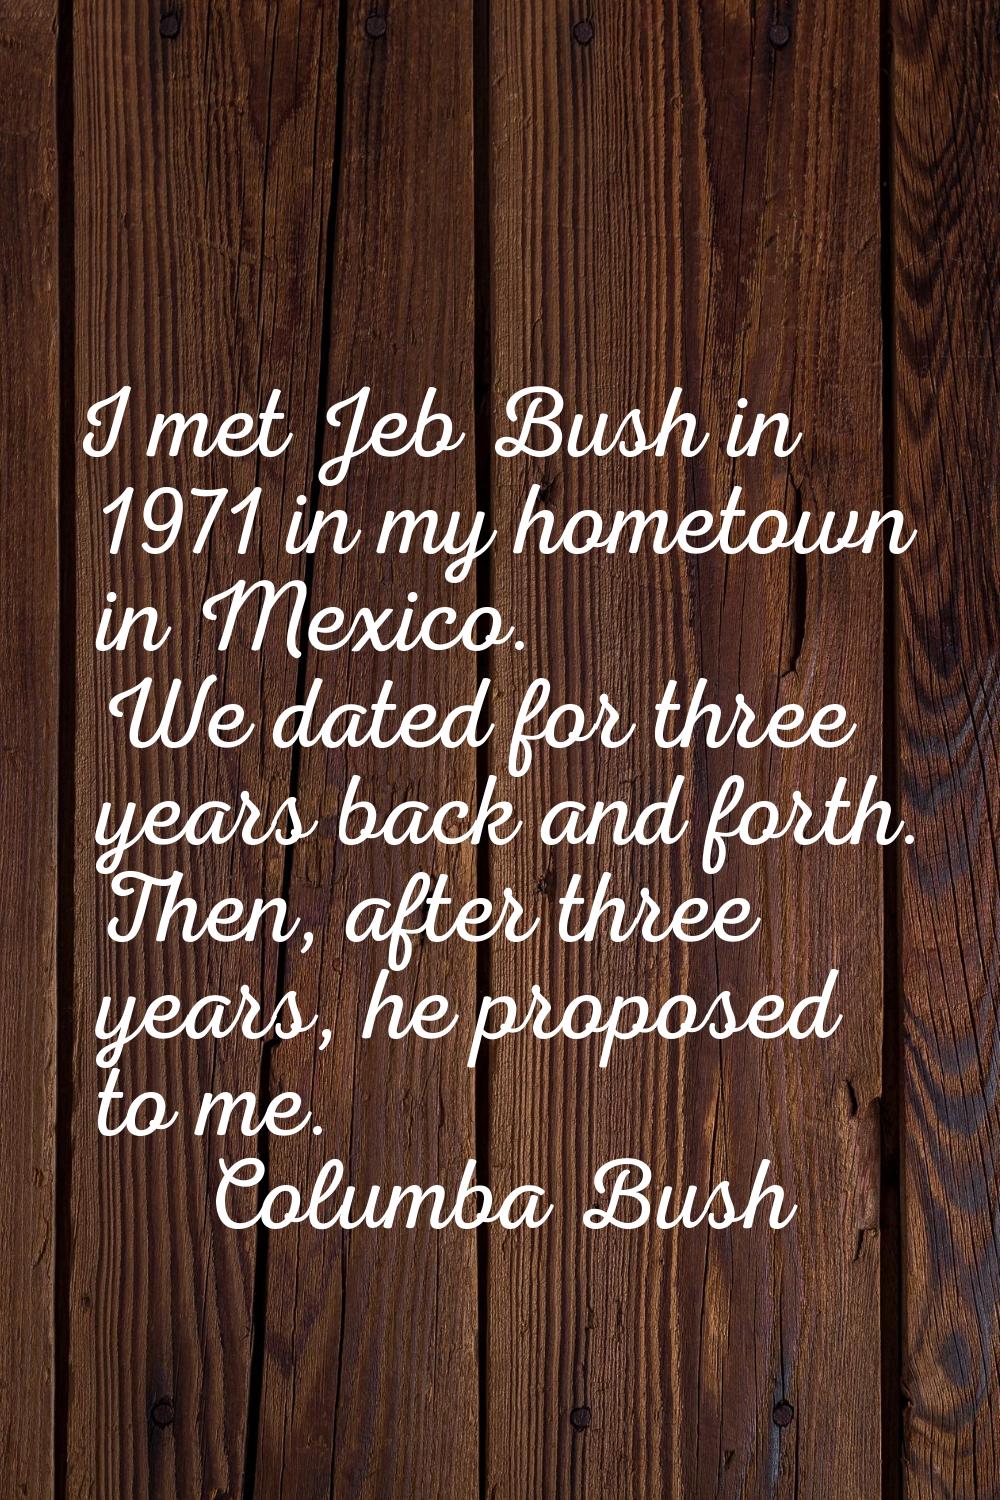 I met Jeb Bush in 1971 in my hometown in Mexico. We dated for three years back and forth. Then, aft